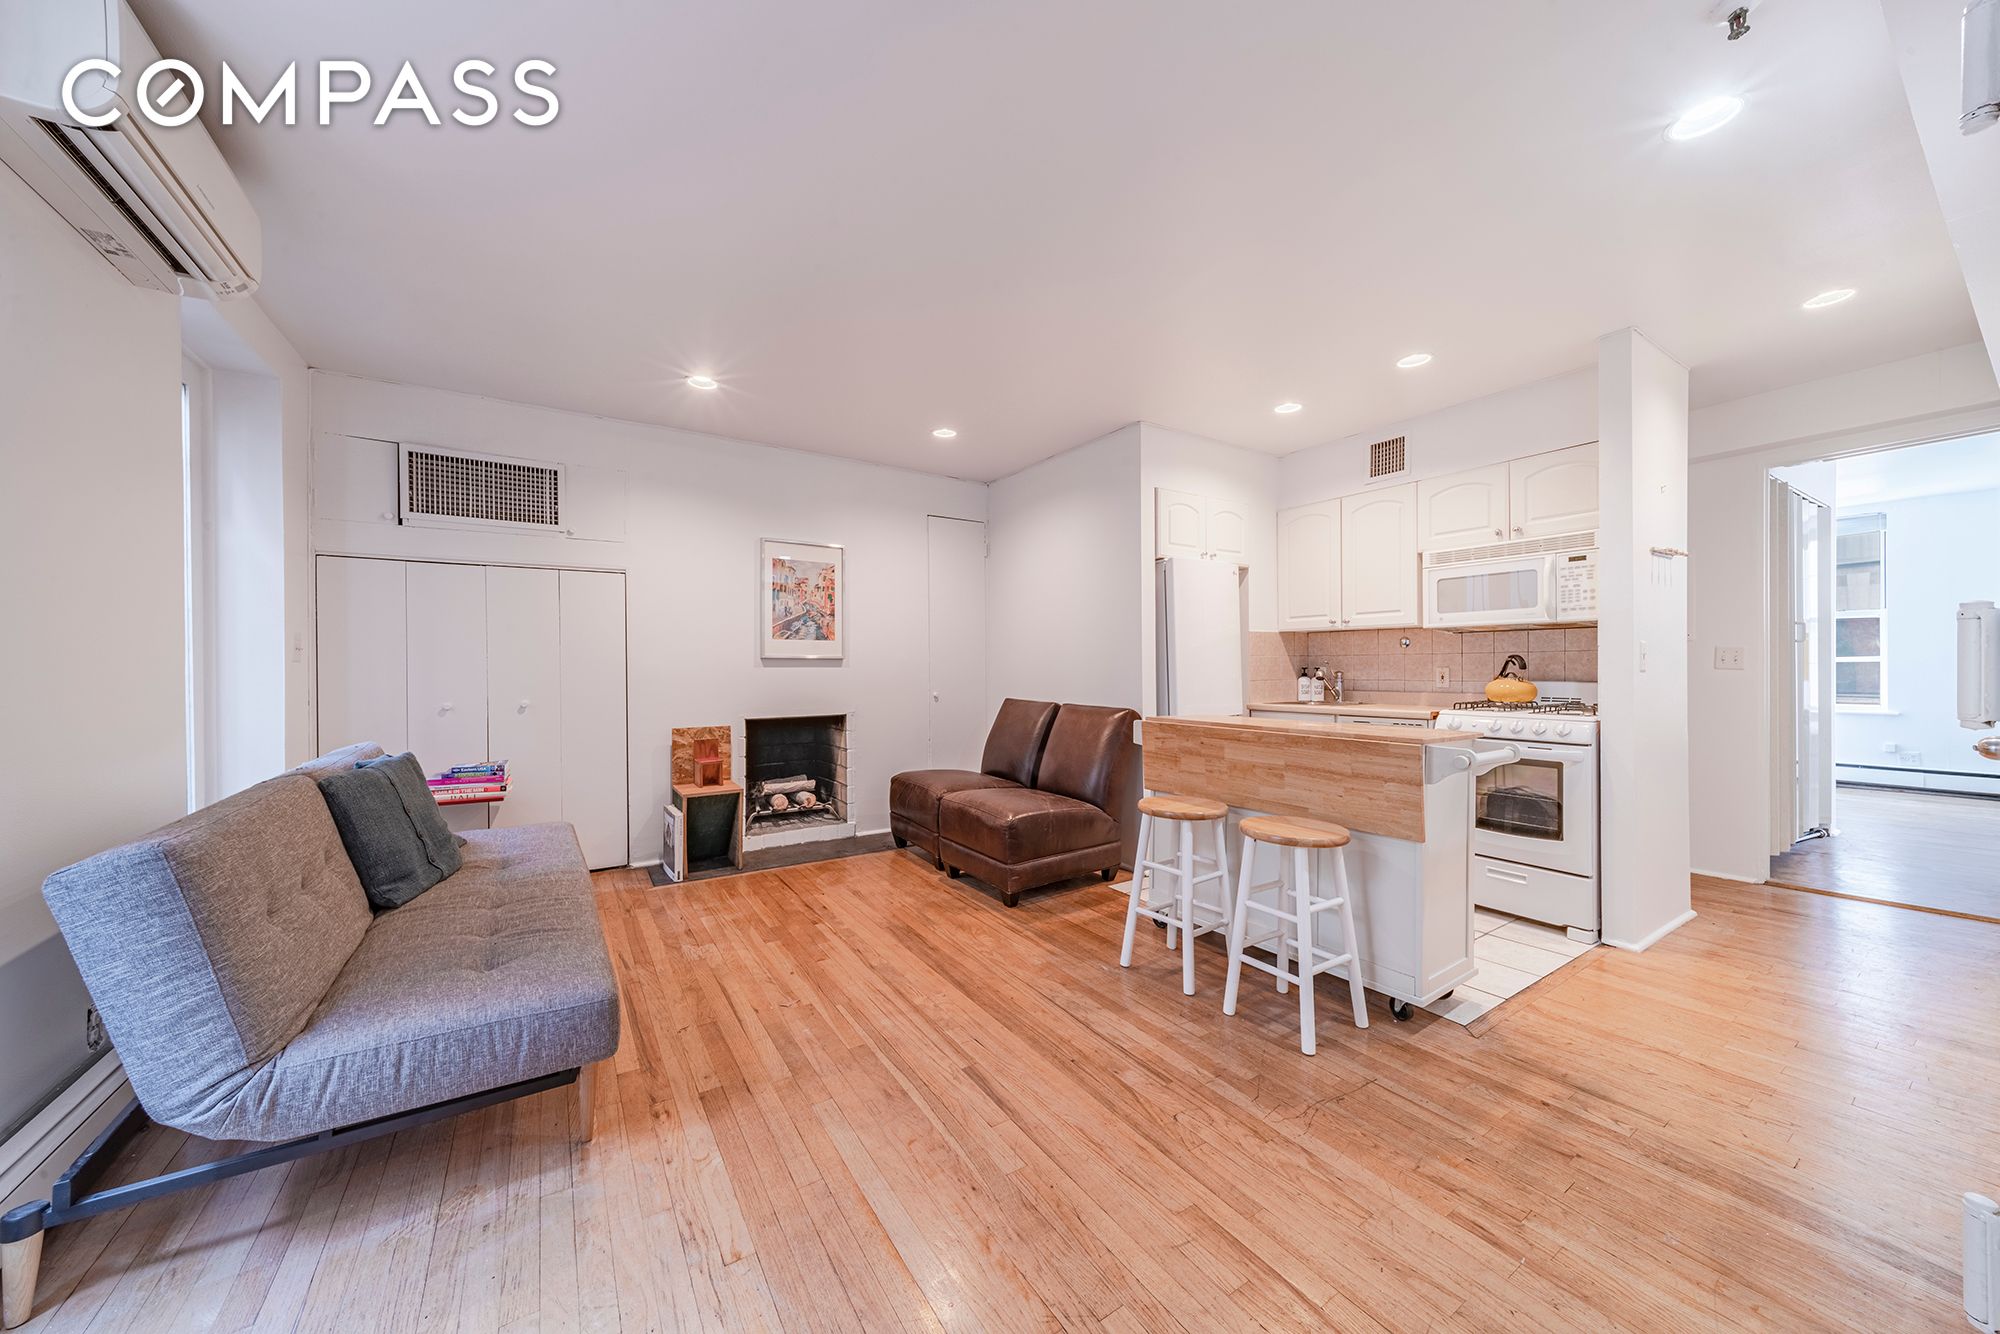 210 West 20th Street 2, Chelsea, Downtown, NYC - 2 Bedrooms  
1.5 Bathrooms  
4 Rooms - 